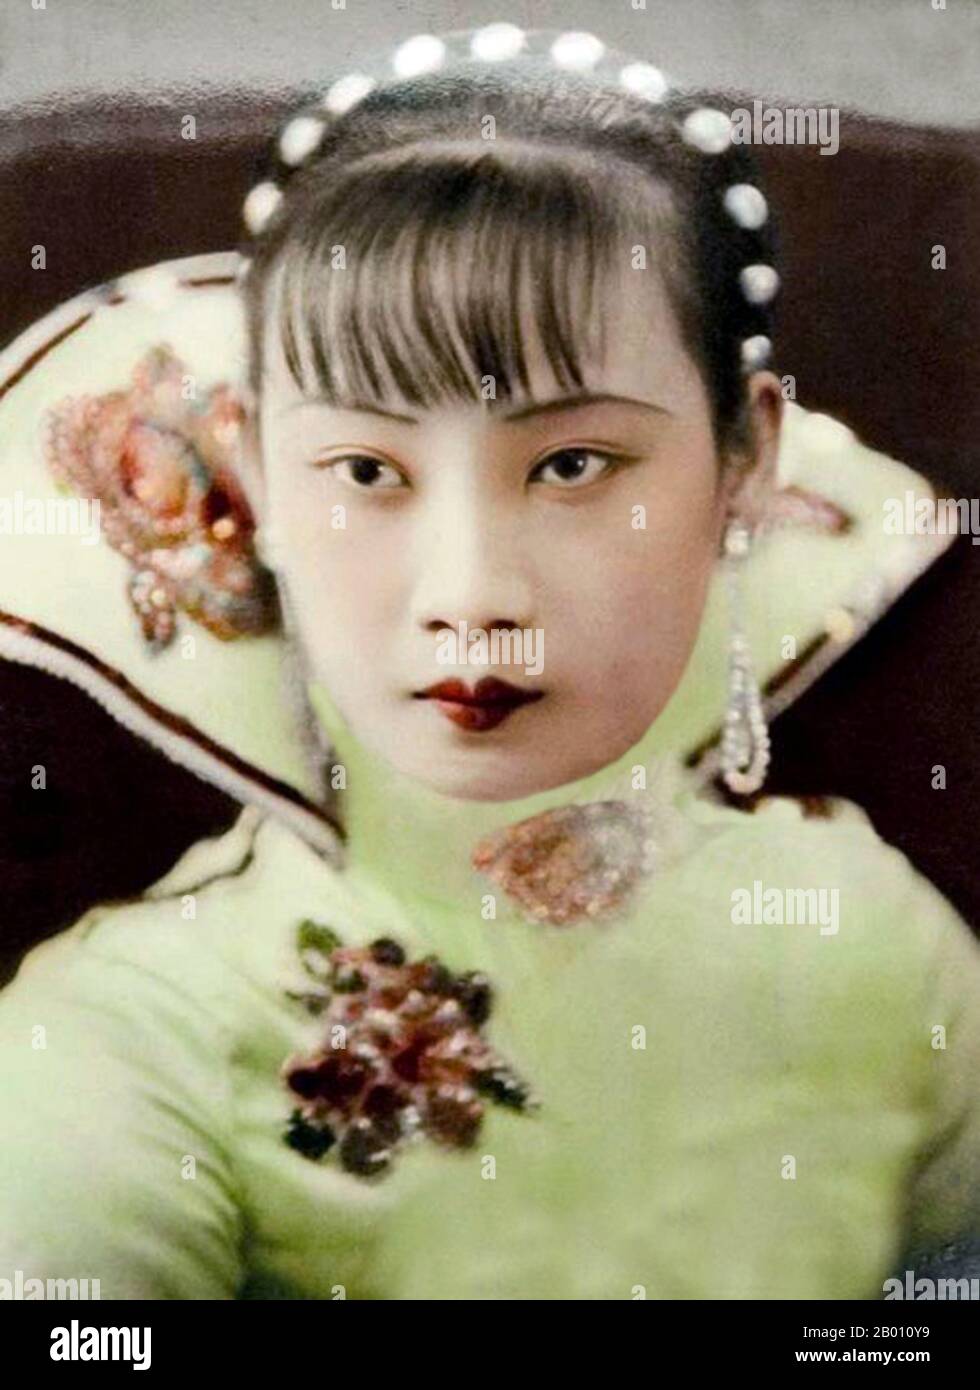 China: Shanghai actress Hu Die, also known as 'Butterfly Hu' (1907-1989), 1946.  Hu Die (1907-1989) had a career as a film actress from the late 1920s to the 1960s. She had her most brilliant period in the 1930s and the 1940s. Early in the 1930s, she played the leading role in China's first sound film, 'The Singsong Girl', in which she portrays a kindhearted but somewhat ignorant woman who endures her husband's mistreatment and oppression without the slightest resistance. Stock Photo